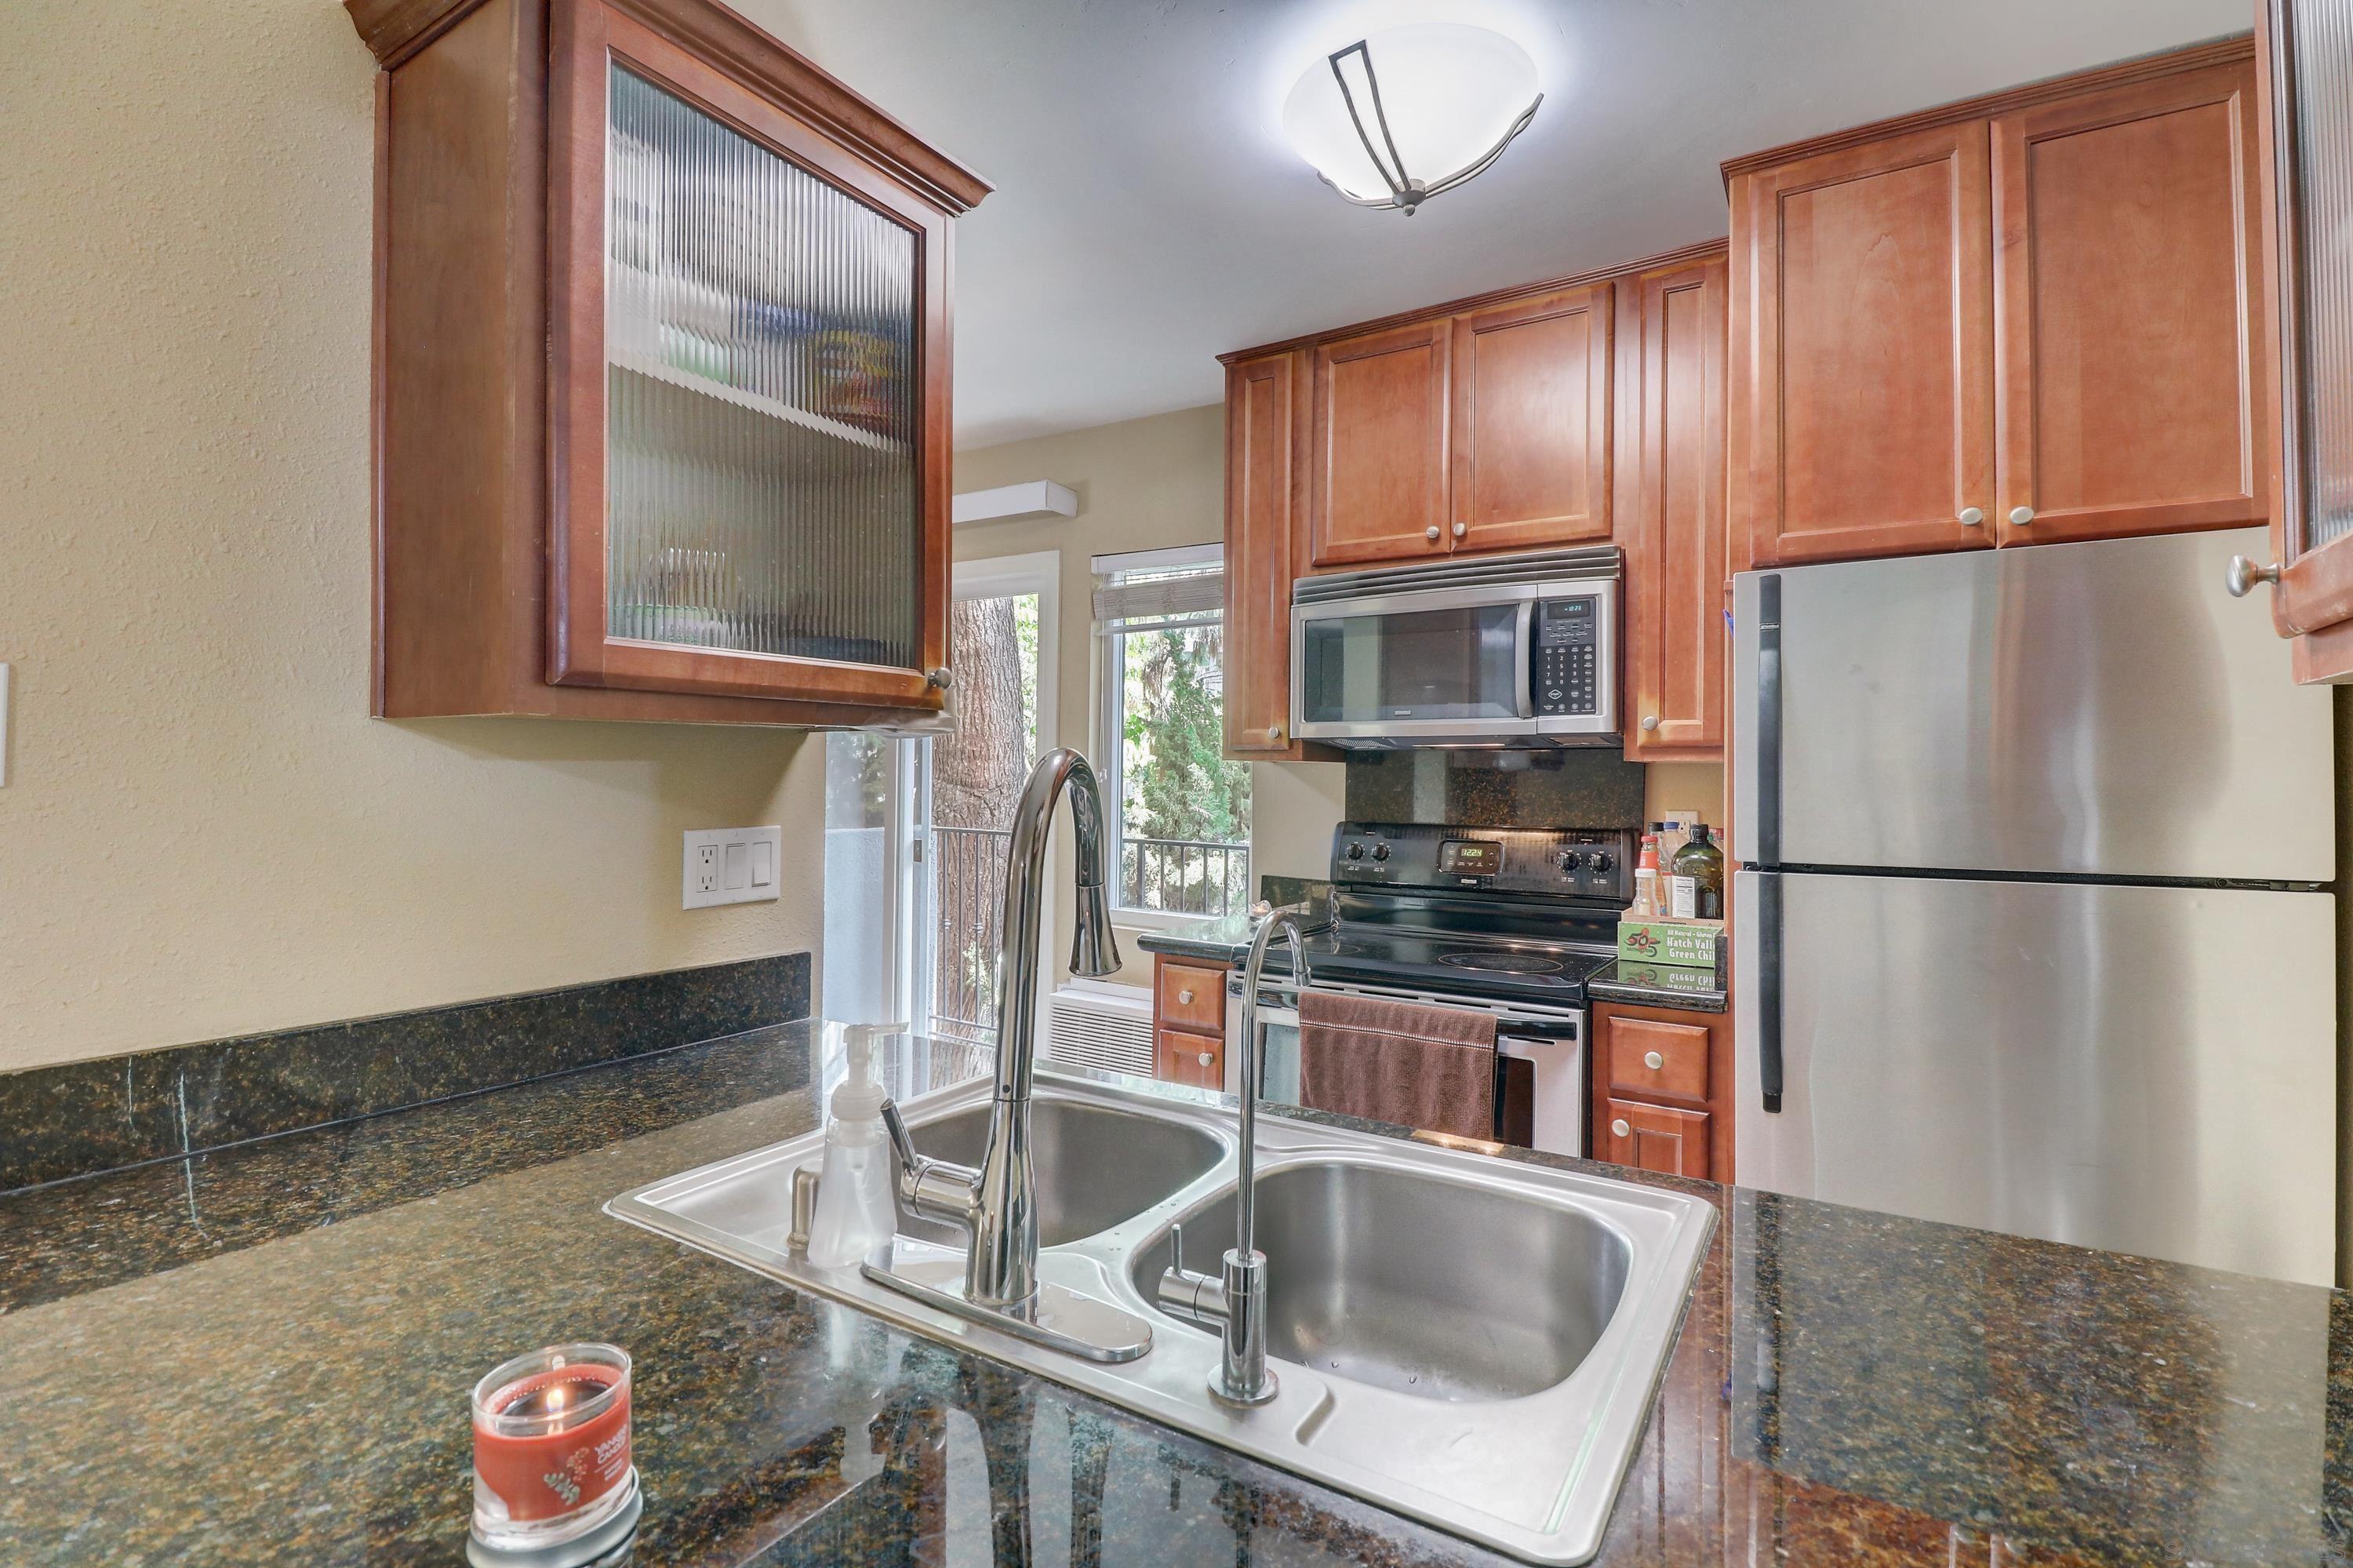 a kitchen with stainless steel appliances granite countertop a refrigerator a stove top oven a sink and dishwasher